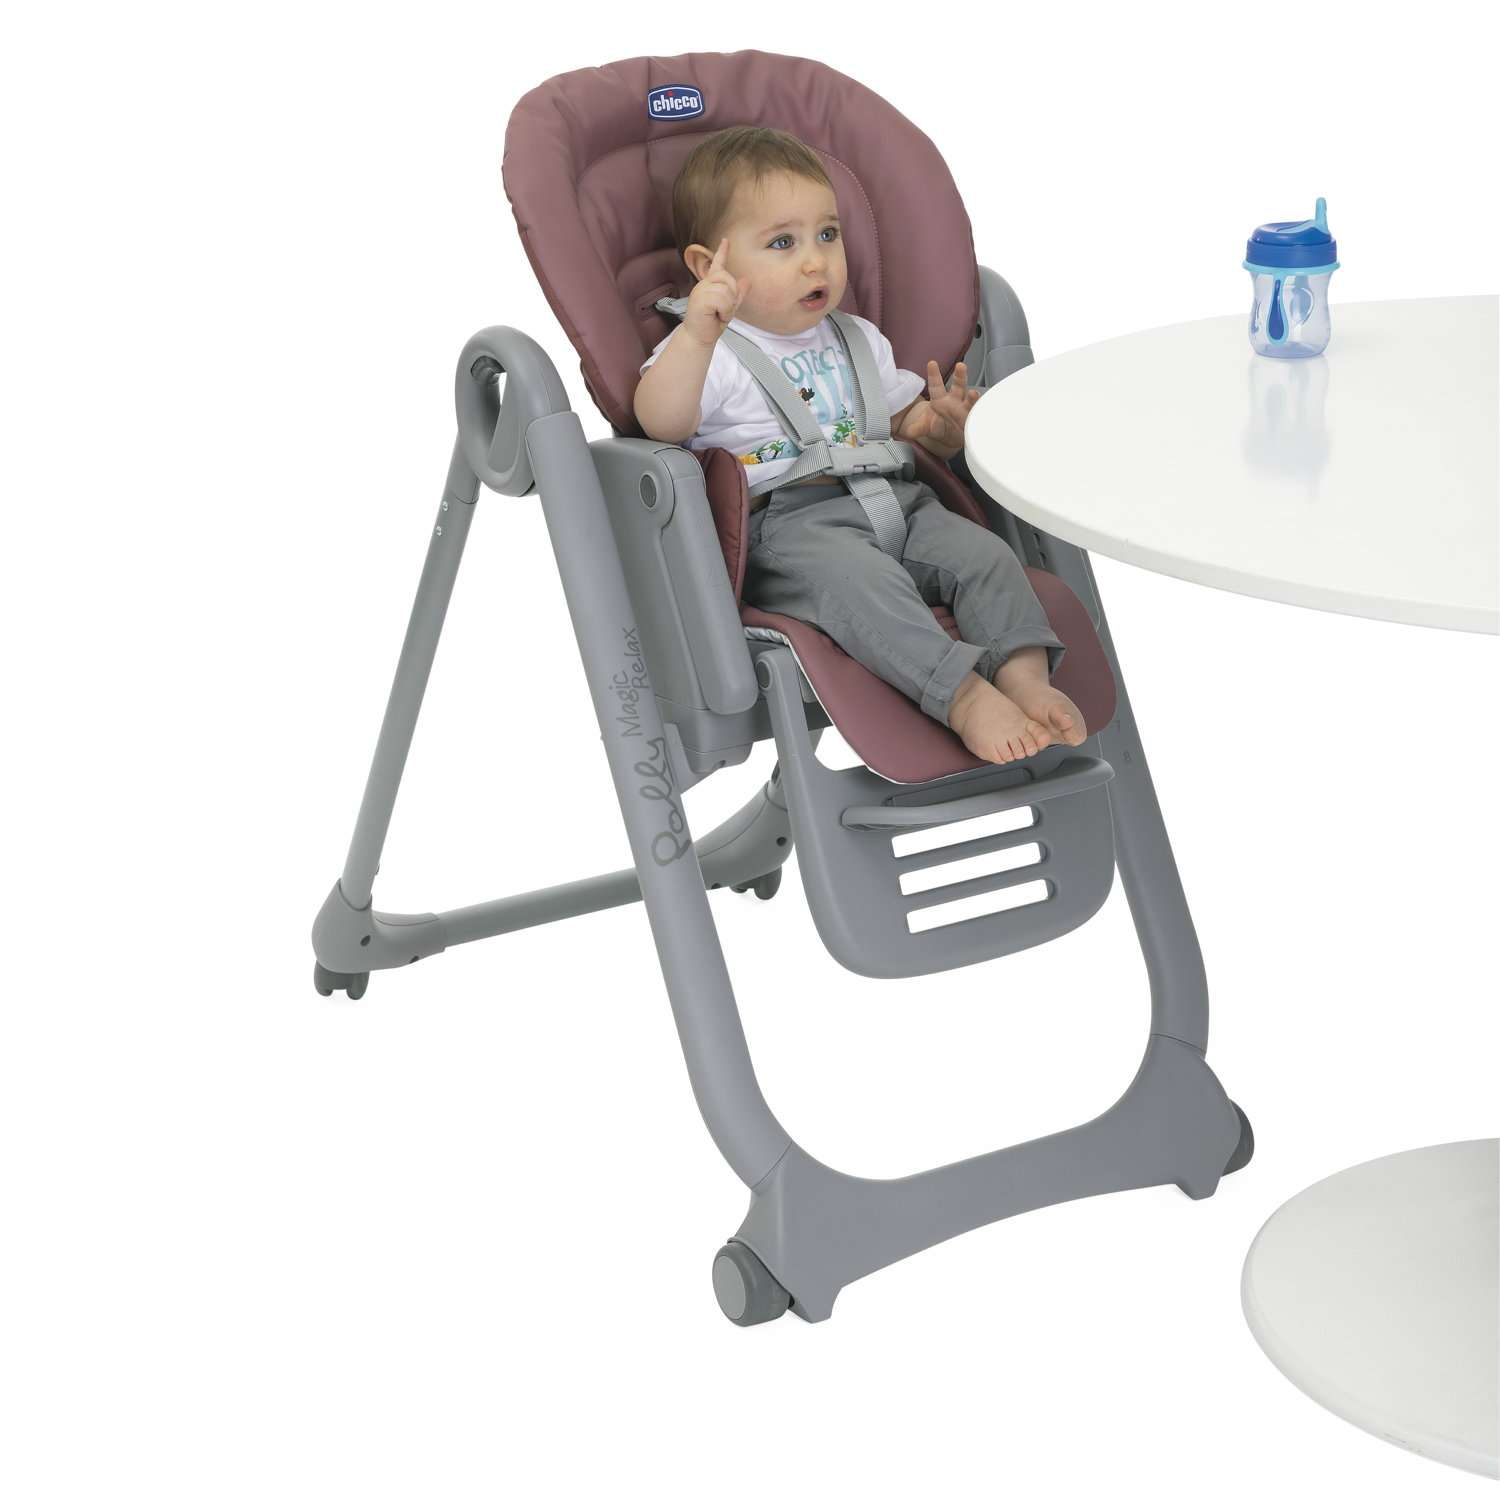 Chicco polly magic relax. Стульчик Chicco Polly Magic. Чикко Полли Мэджик. Polly Magic Relax от Chicco.